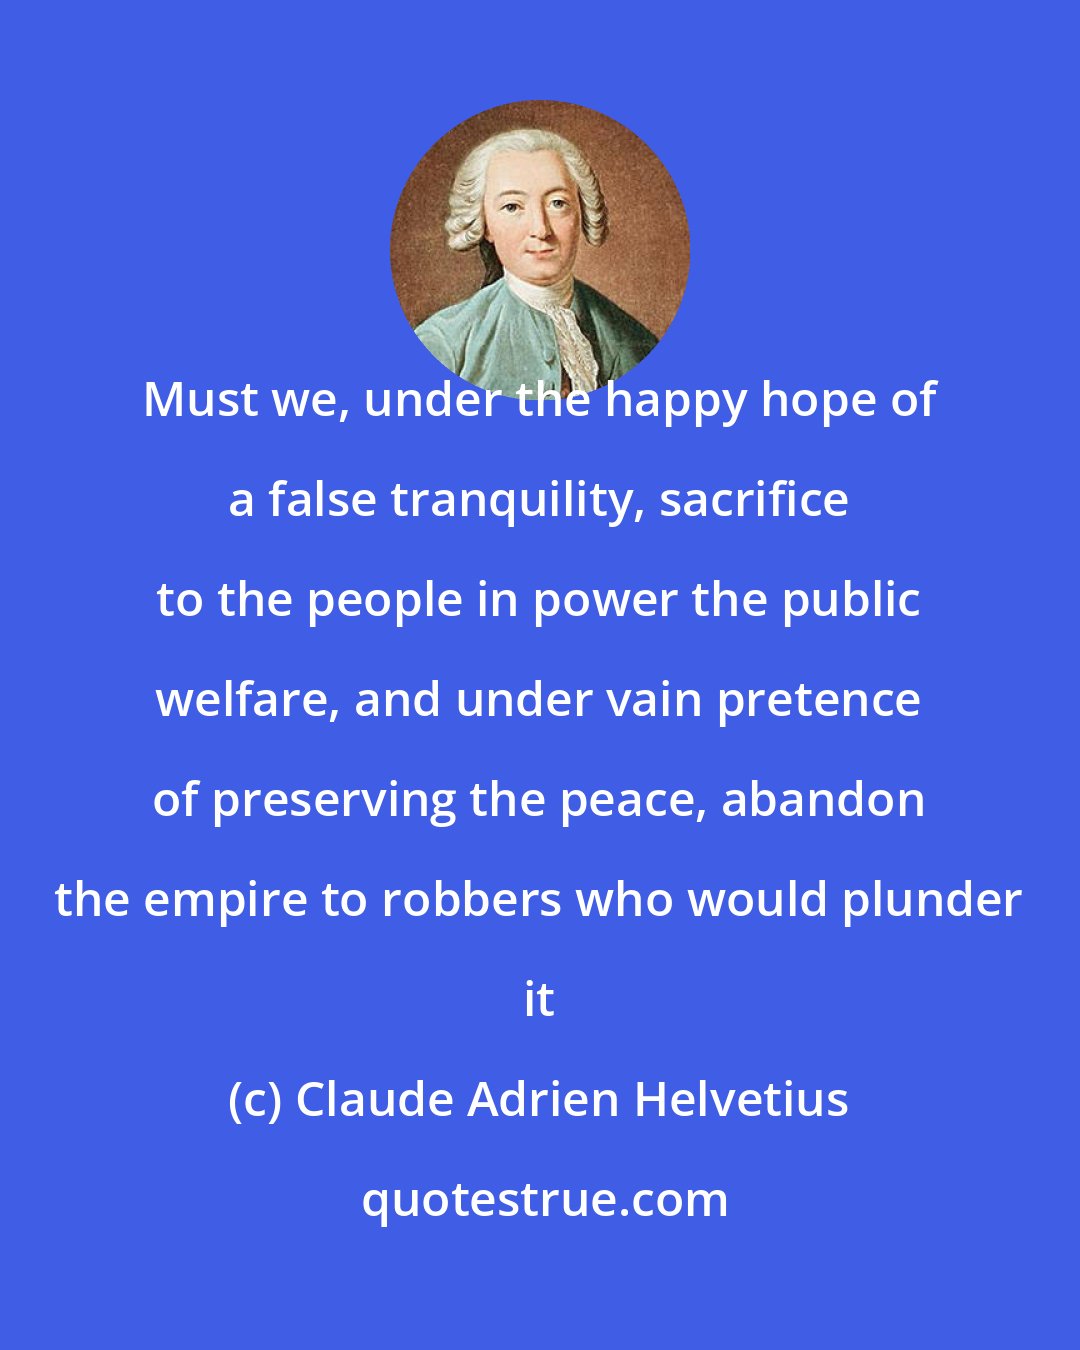 Claude Adrien Helvetius: Must we, under the happy hope of a false tranquility, sacrifice to the people in power the public welfare, and under vain pretence of preserving the peace, abandon the empire to robbers who would plunder it